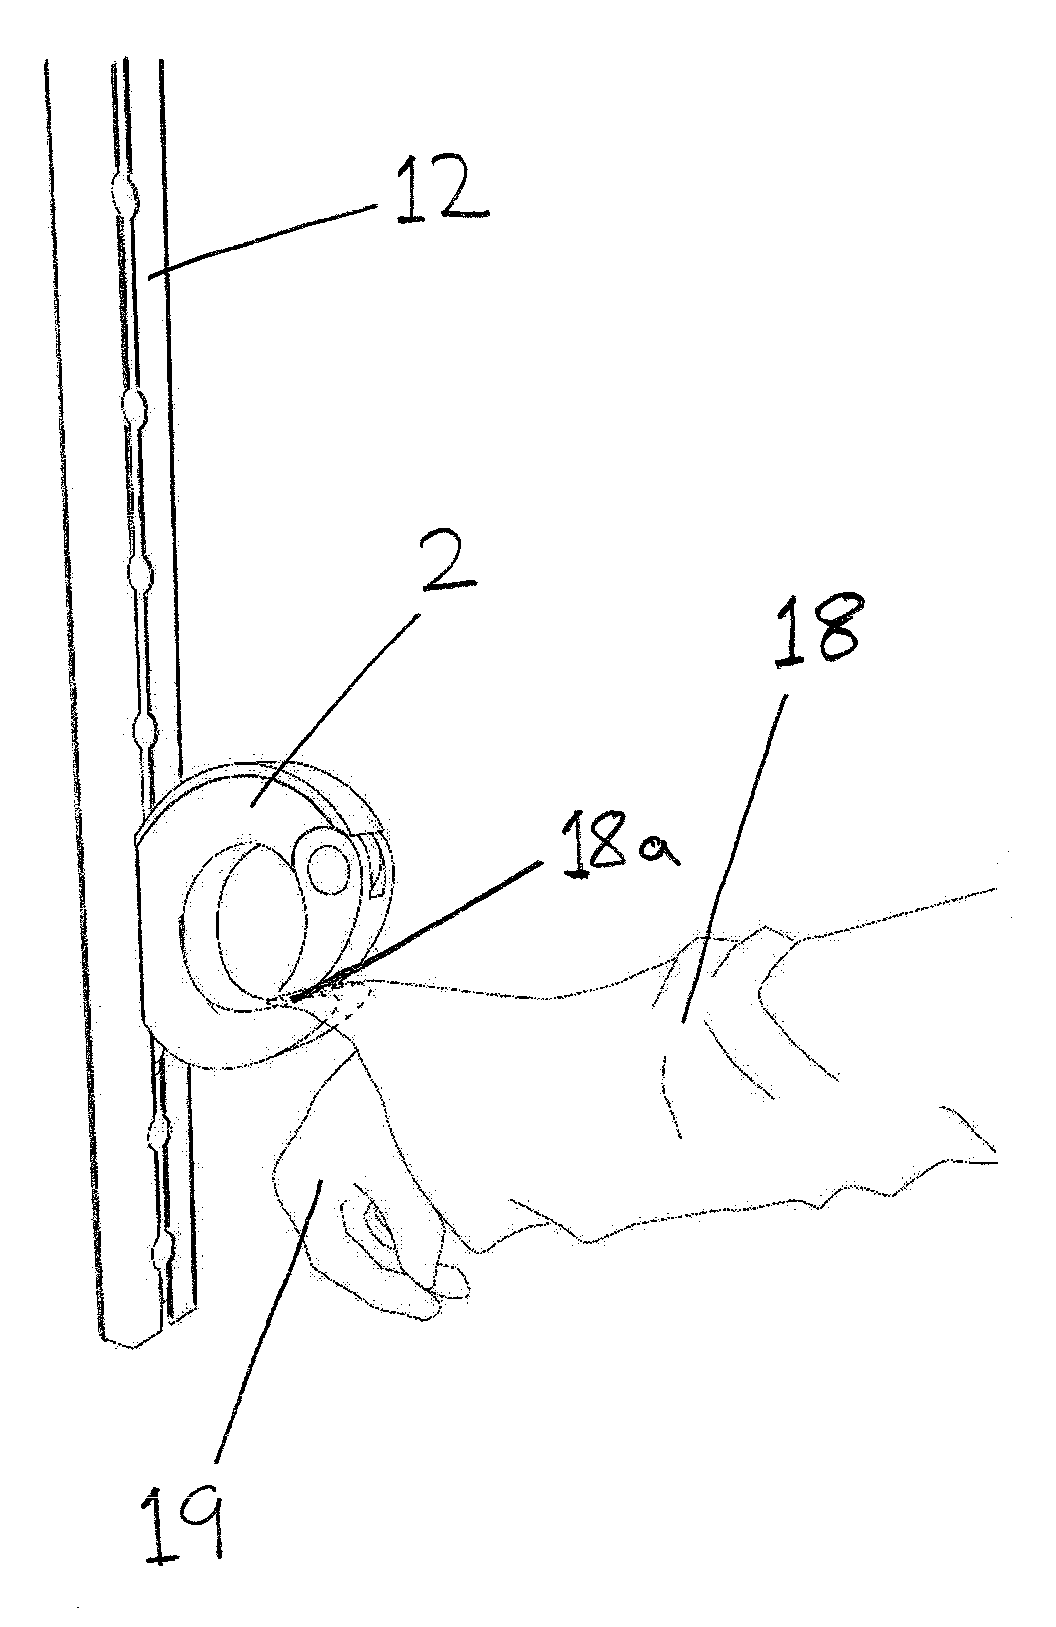 A device for assisting taking off and putting on a garment